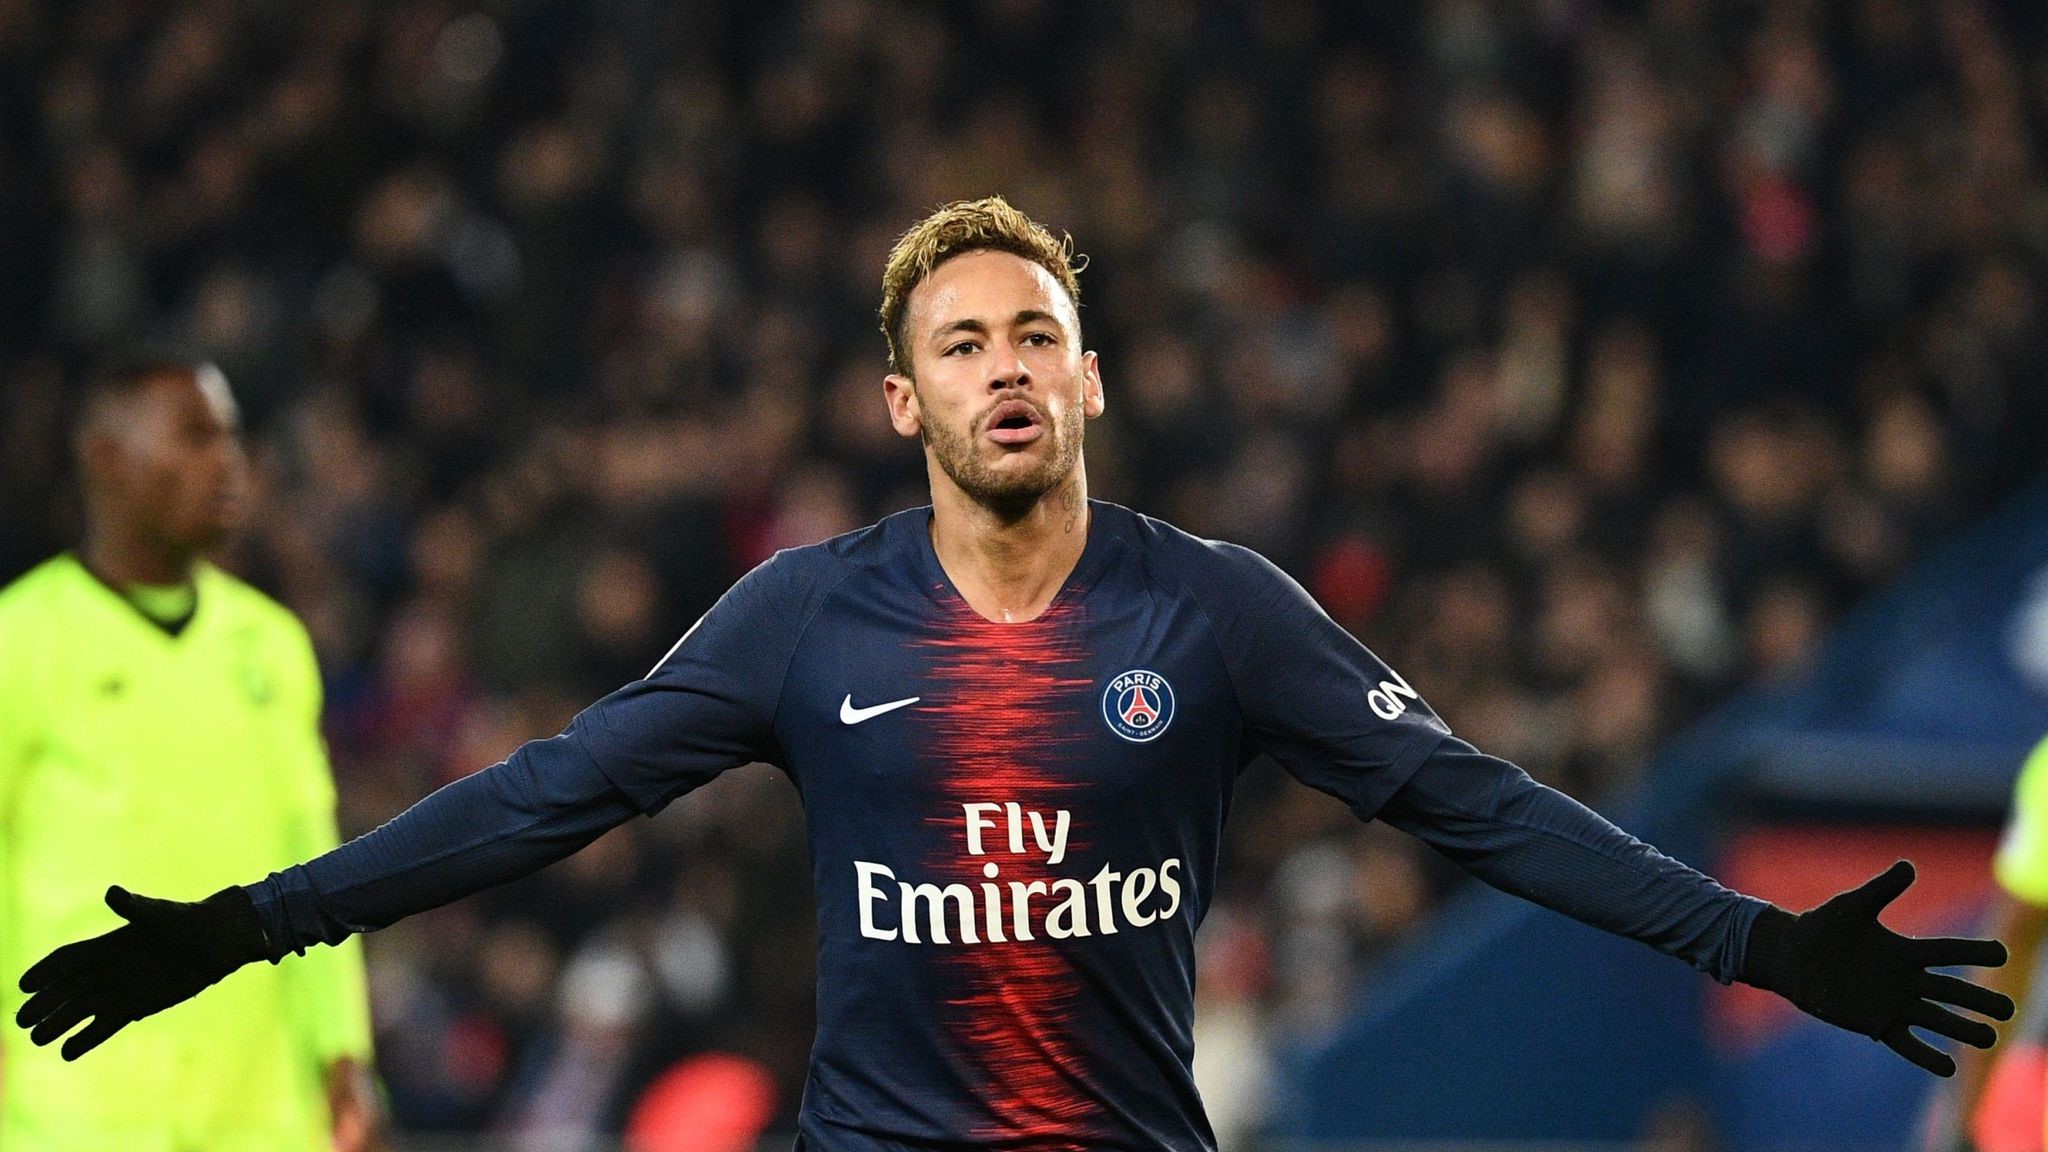 Neymar Jr succeeds in reducing suspension from UEFA competition matches